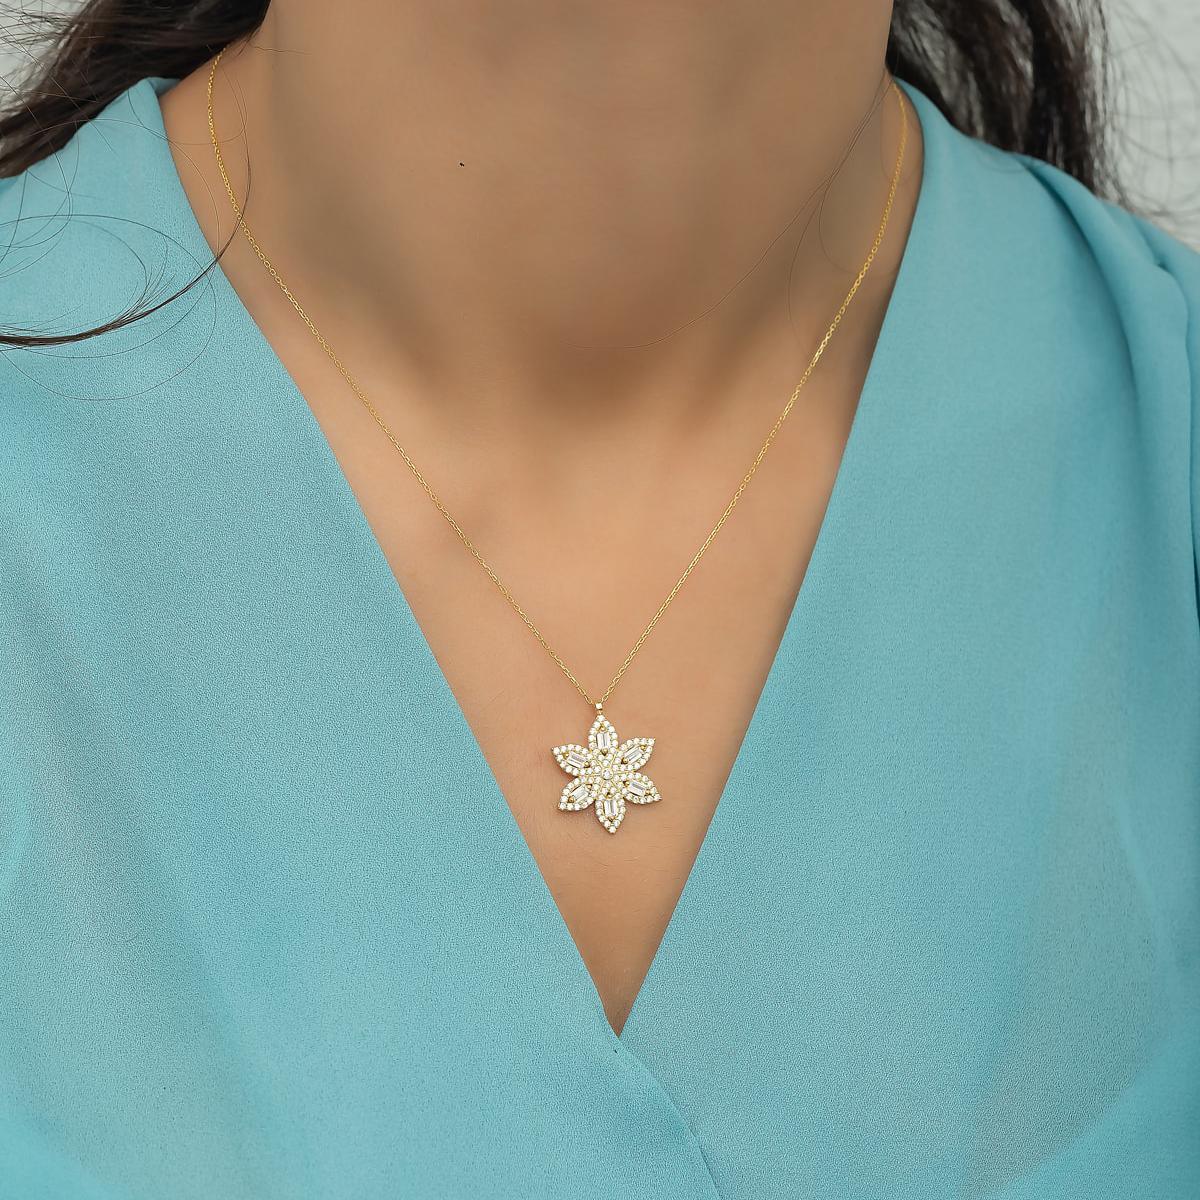 Diamond Flower Necklace • Sunflower Necklace • Flower Necklace Gold - Trending Silver Gifts